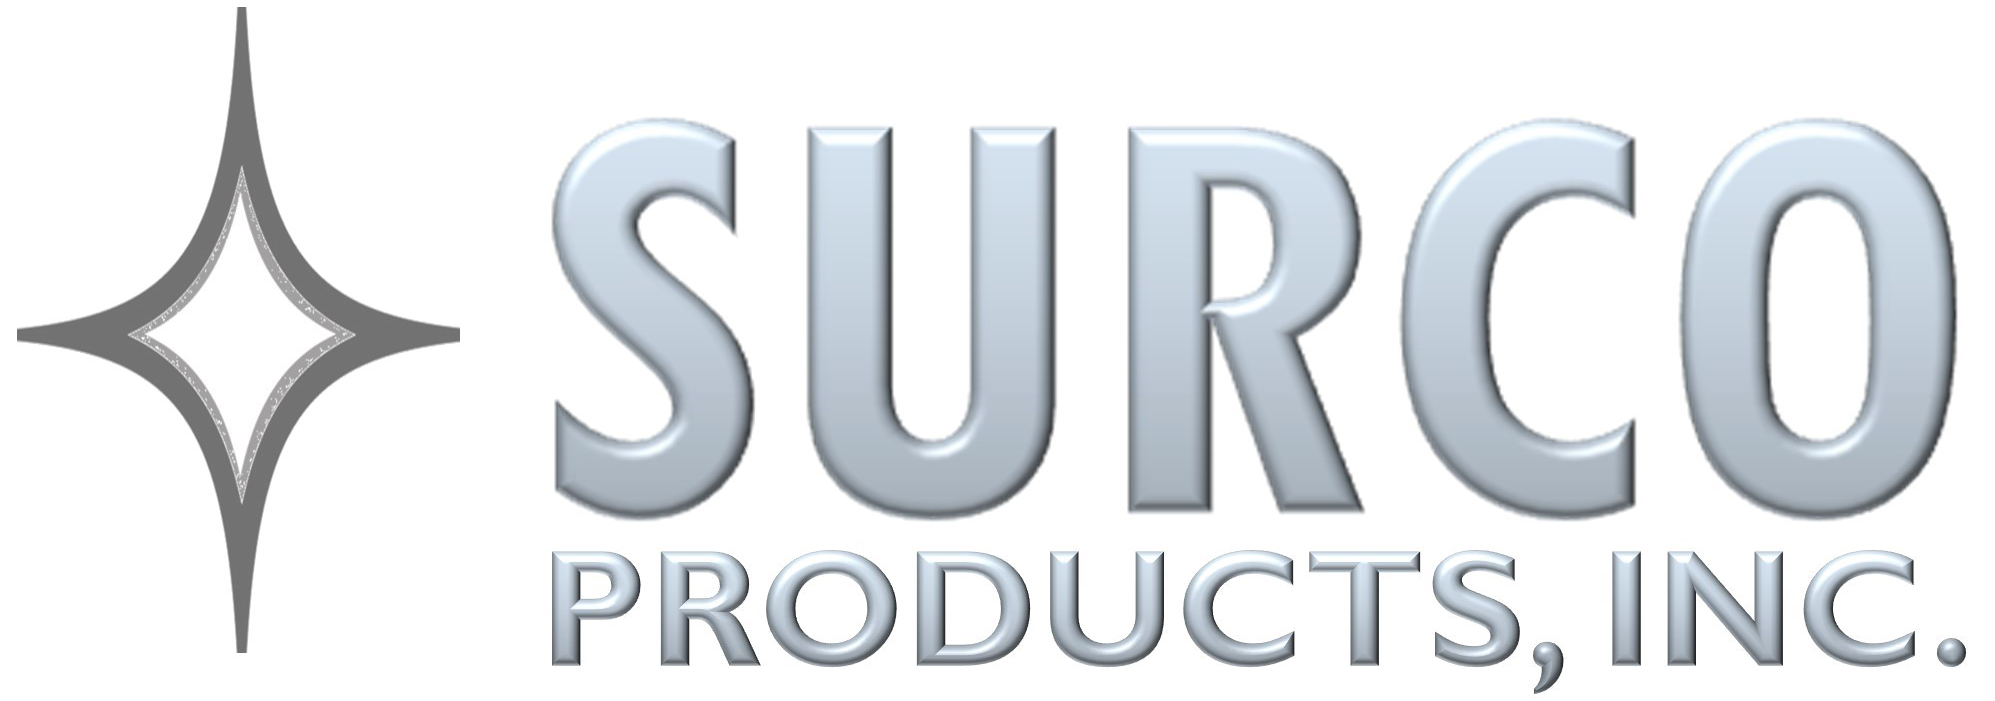 Surco Products Inc.